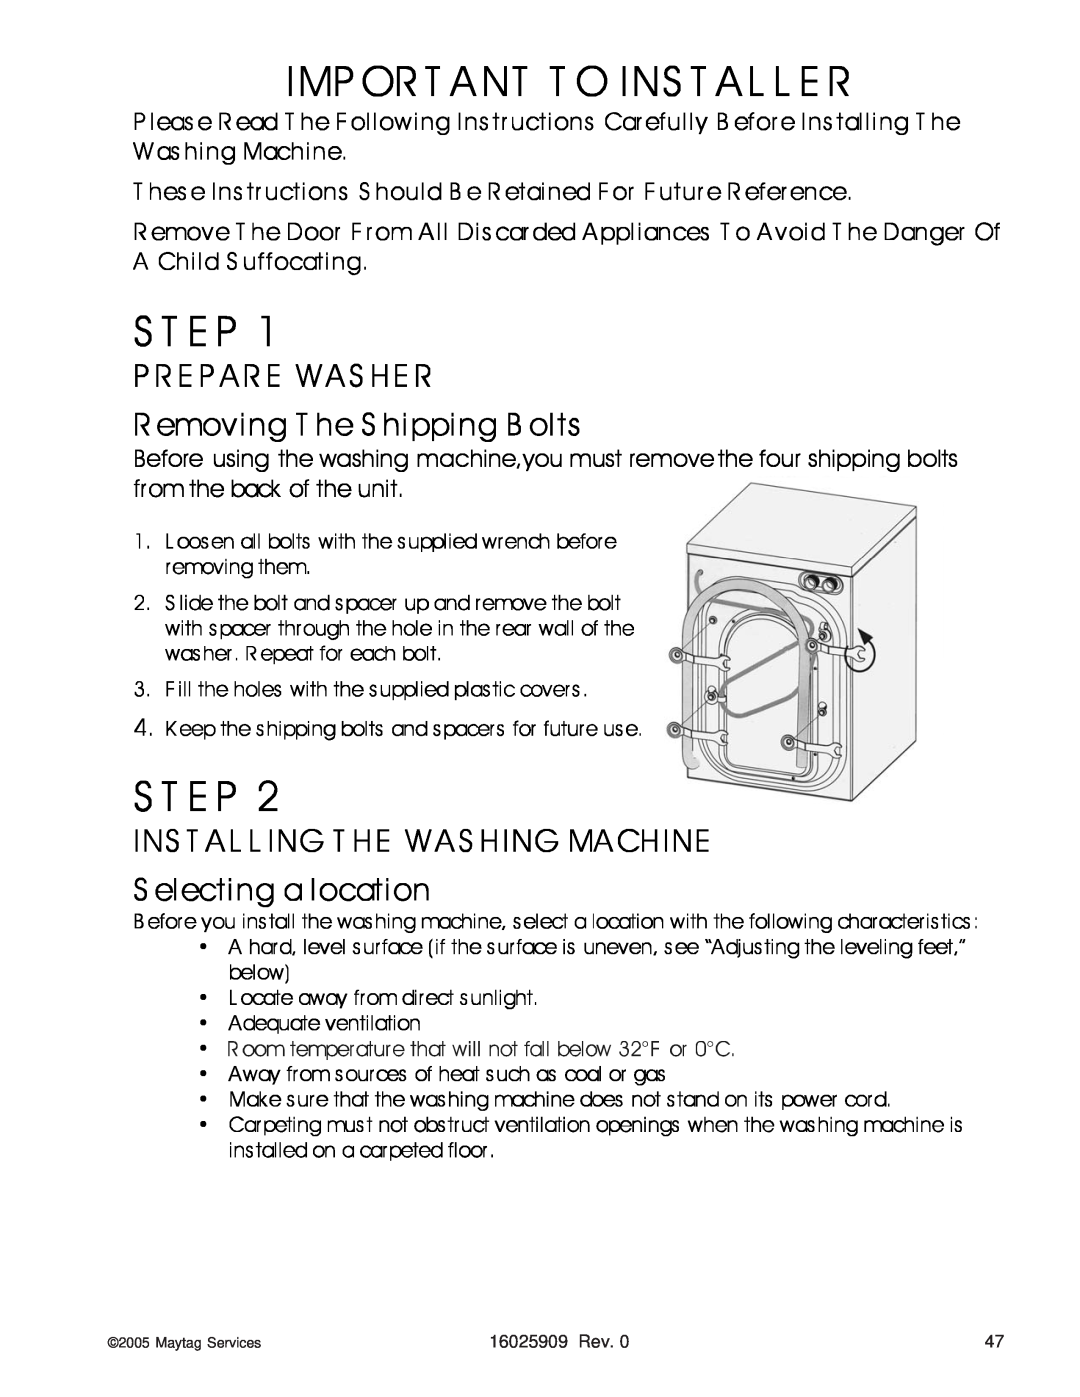 Whirlpool MAH9700AW manual 16025909 Rev, Maytag Services 